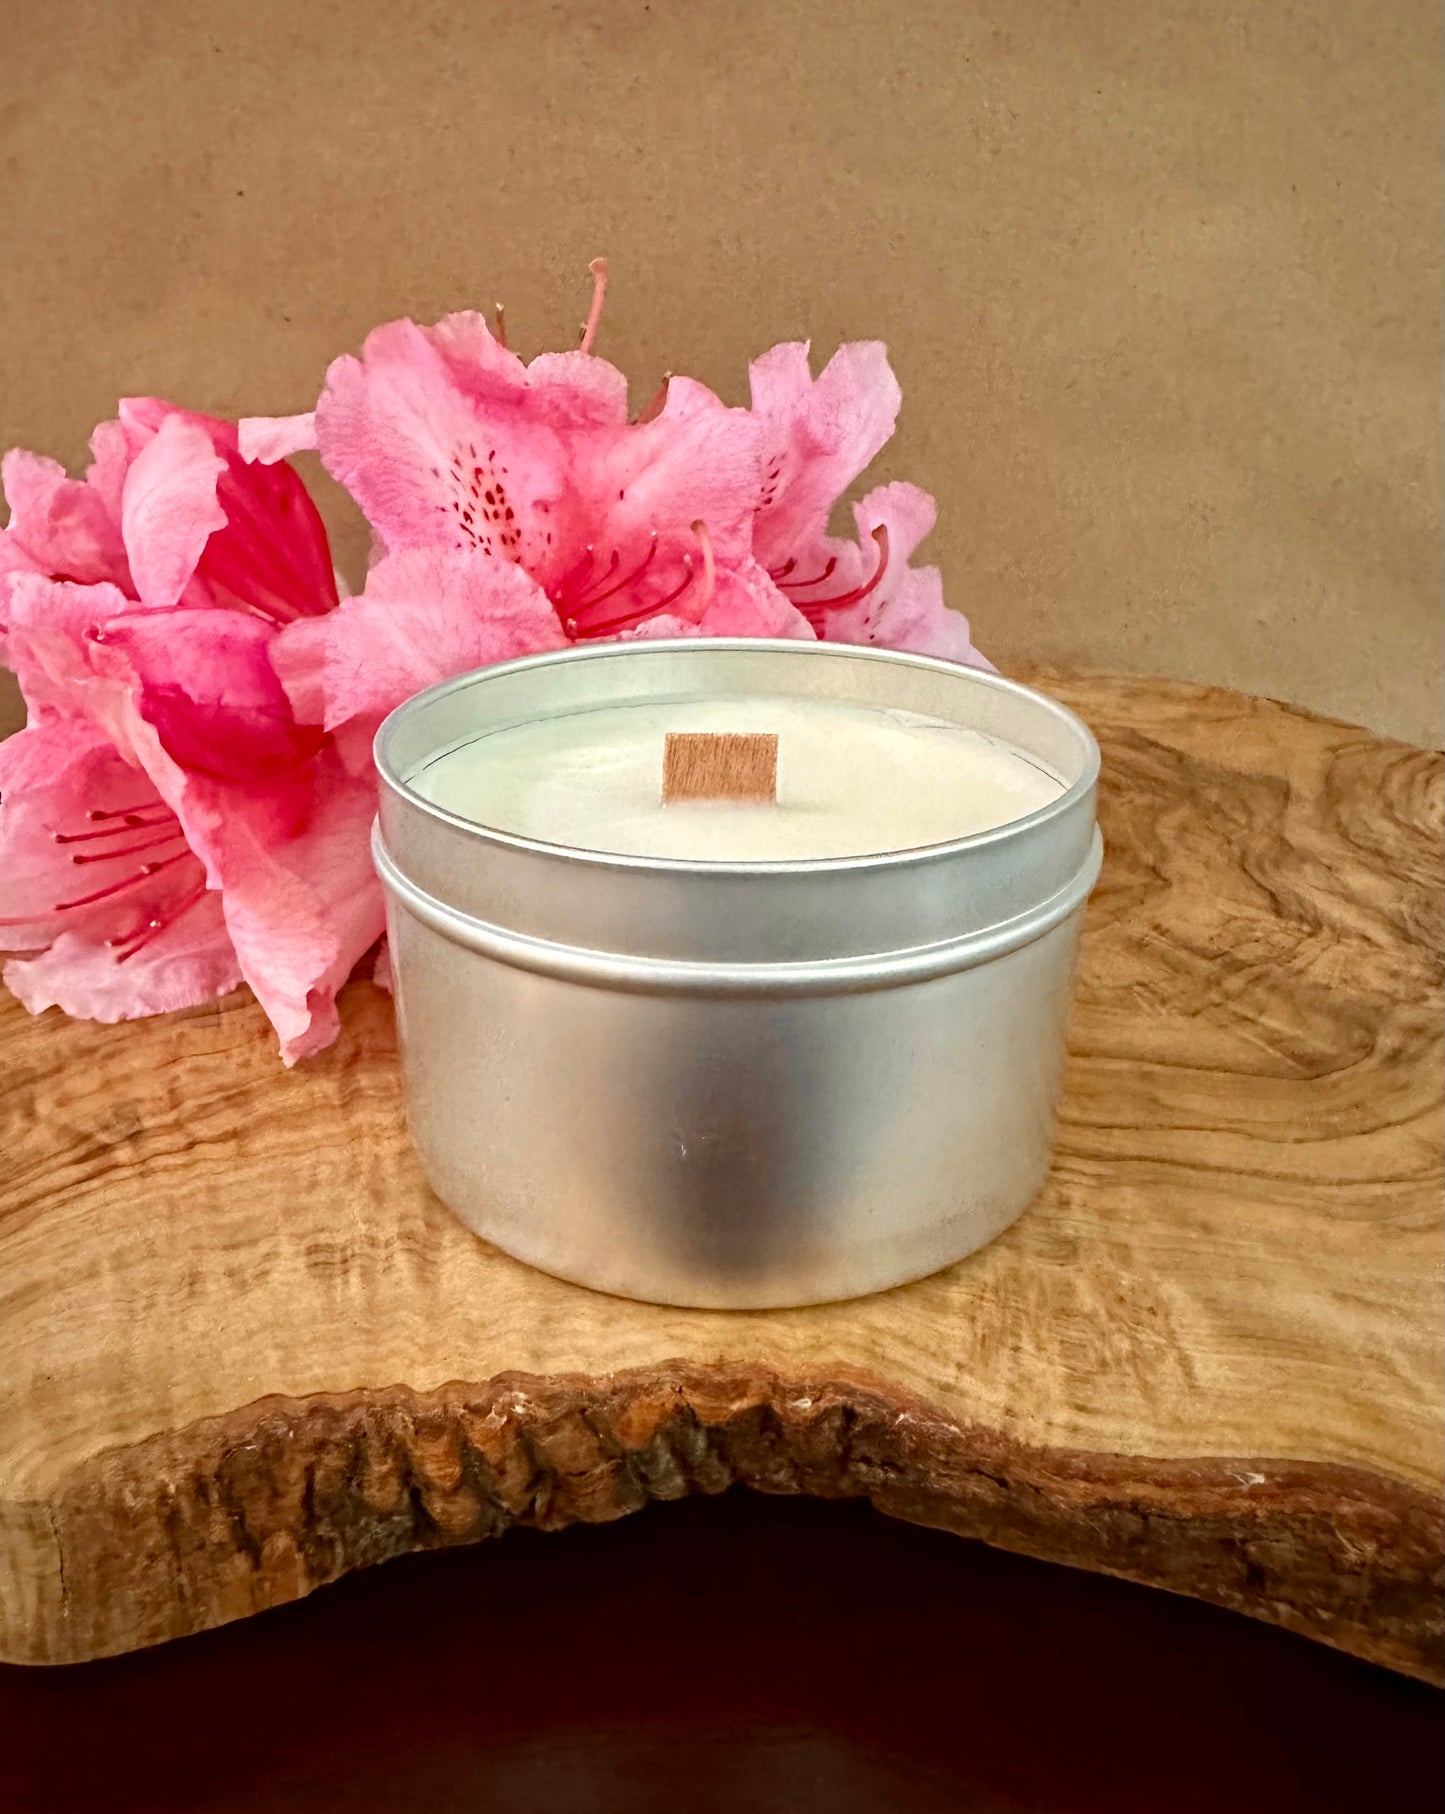 Skagit Wild Coconut and Lime 8oz. Candle